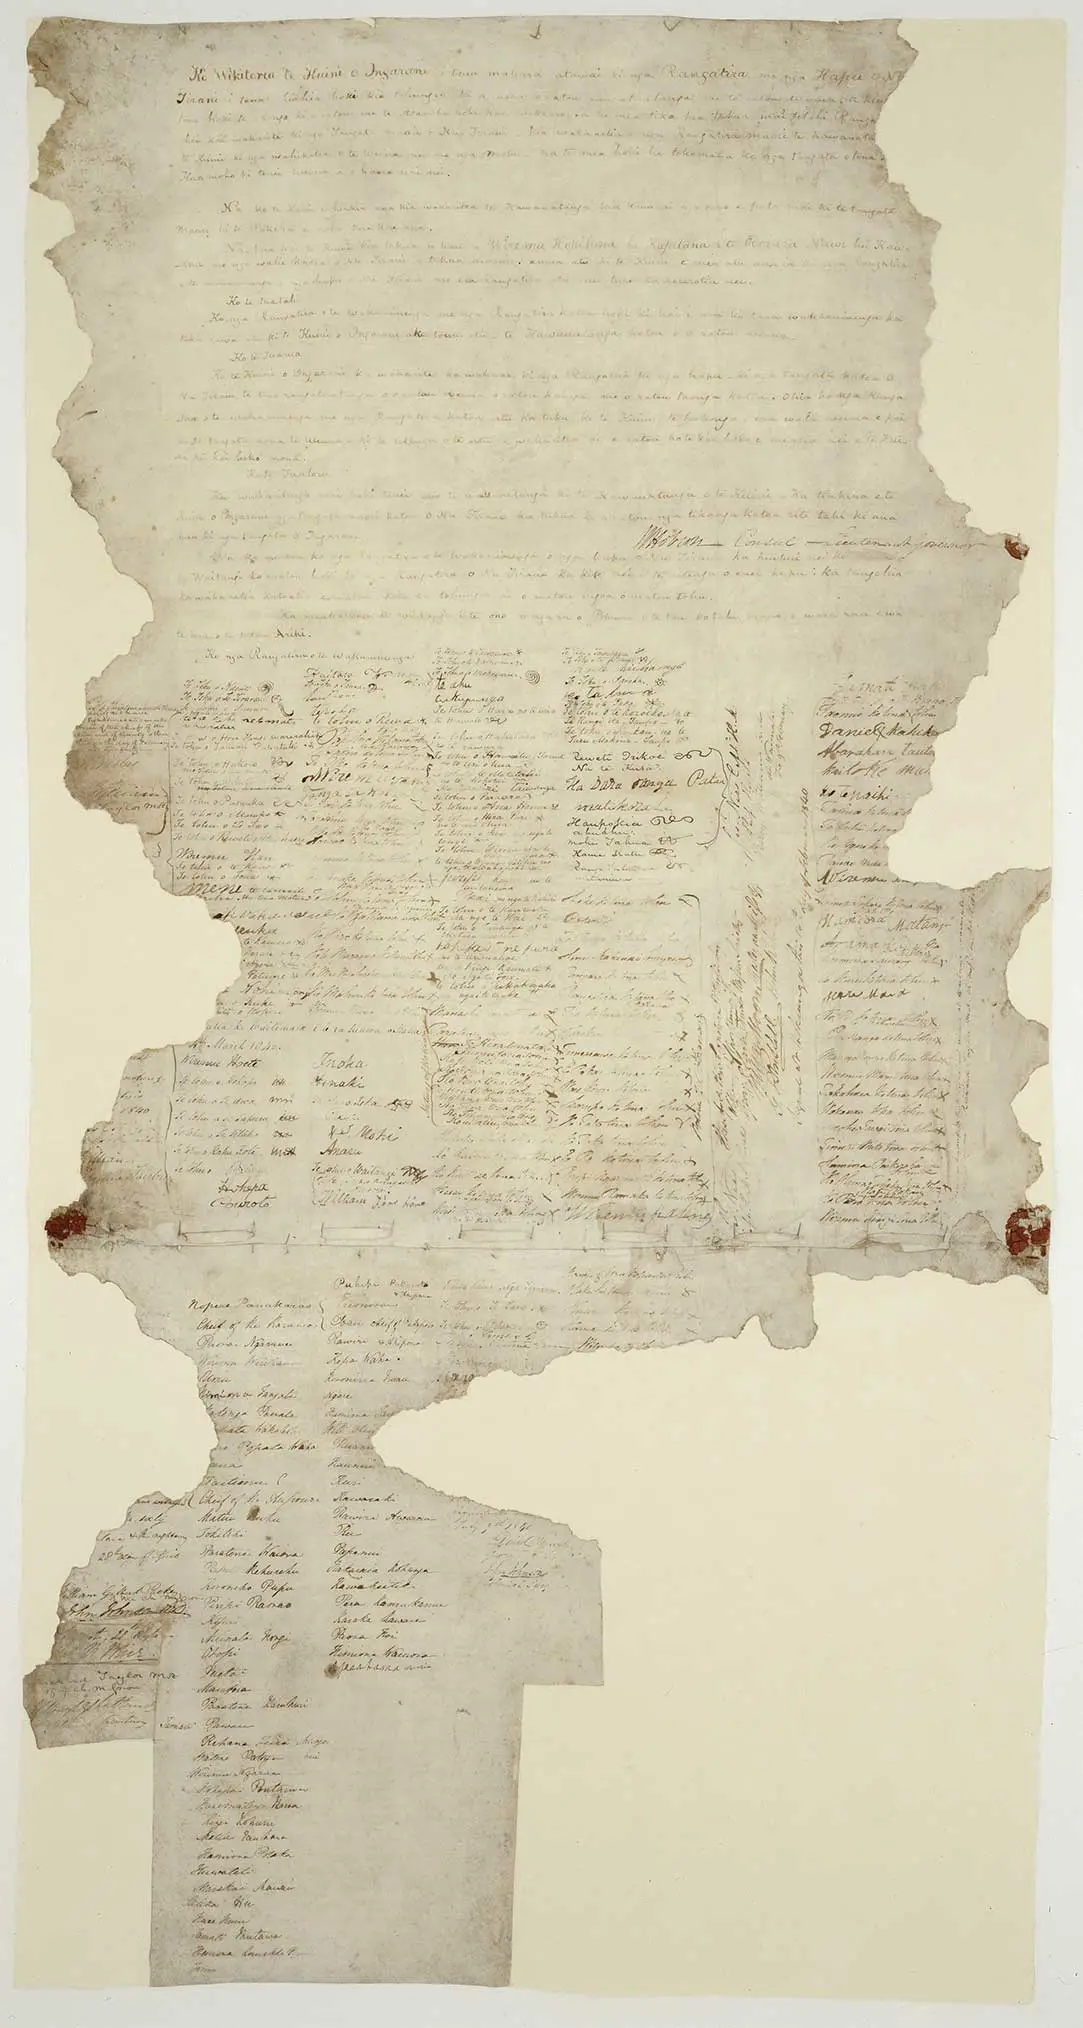 The Waitangi sheet of te Tiriti o Waitangi — the Treaty of Waitangi. It shows handwriting in te reo Māori at the top with signatures or marks from rangatira below. The sheet is badly degraded and much of the outer edges are missing, particularly at the bottom of the sheet.